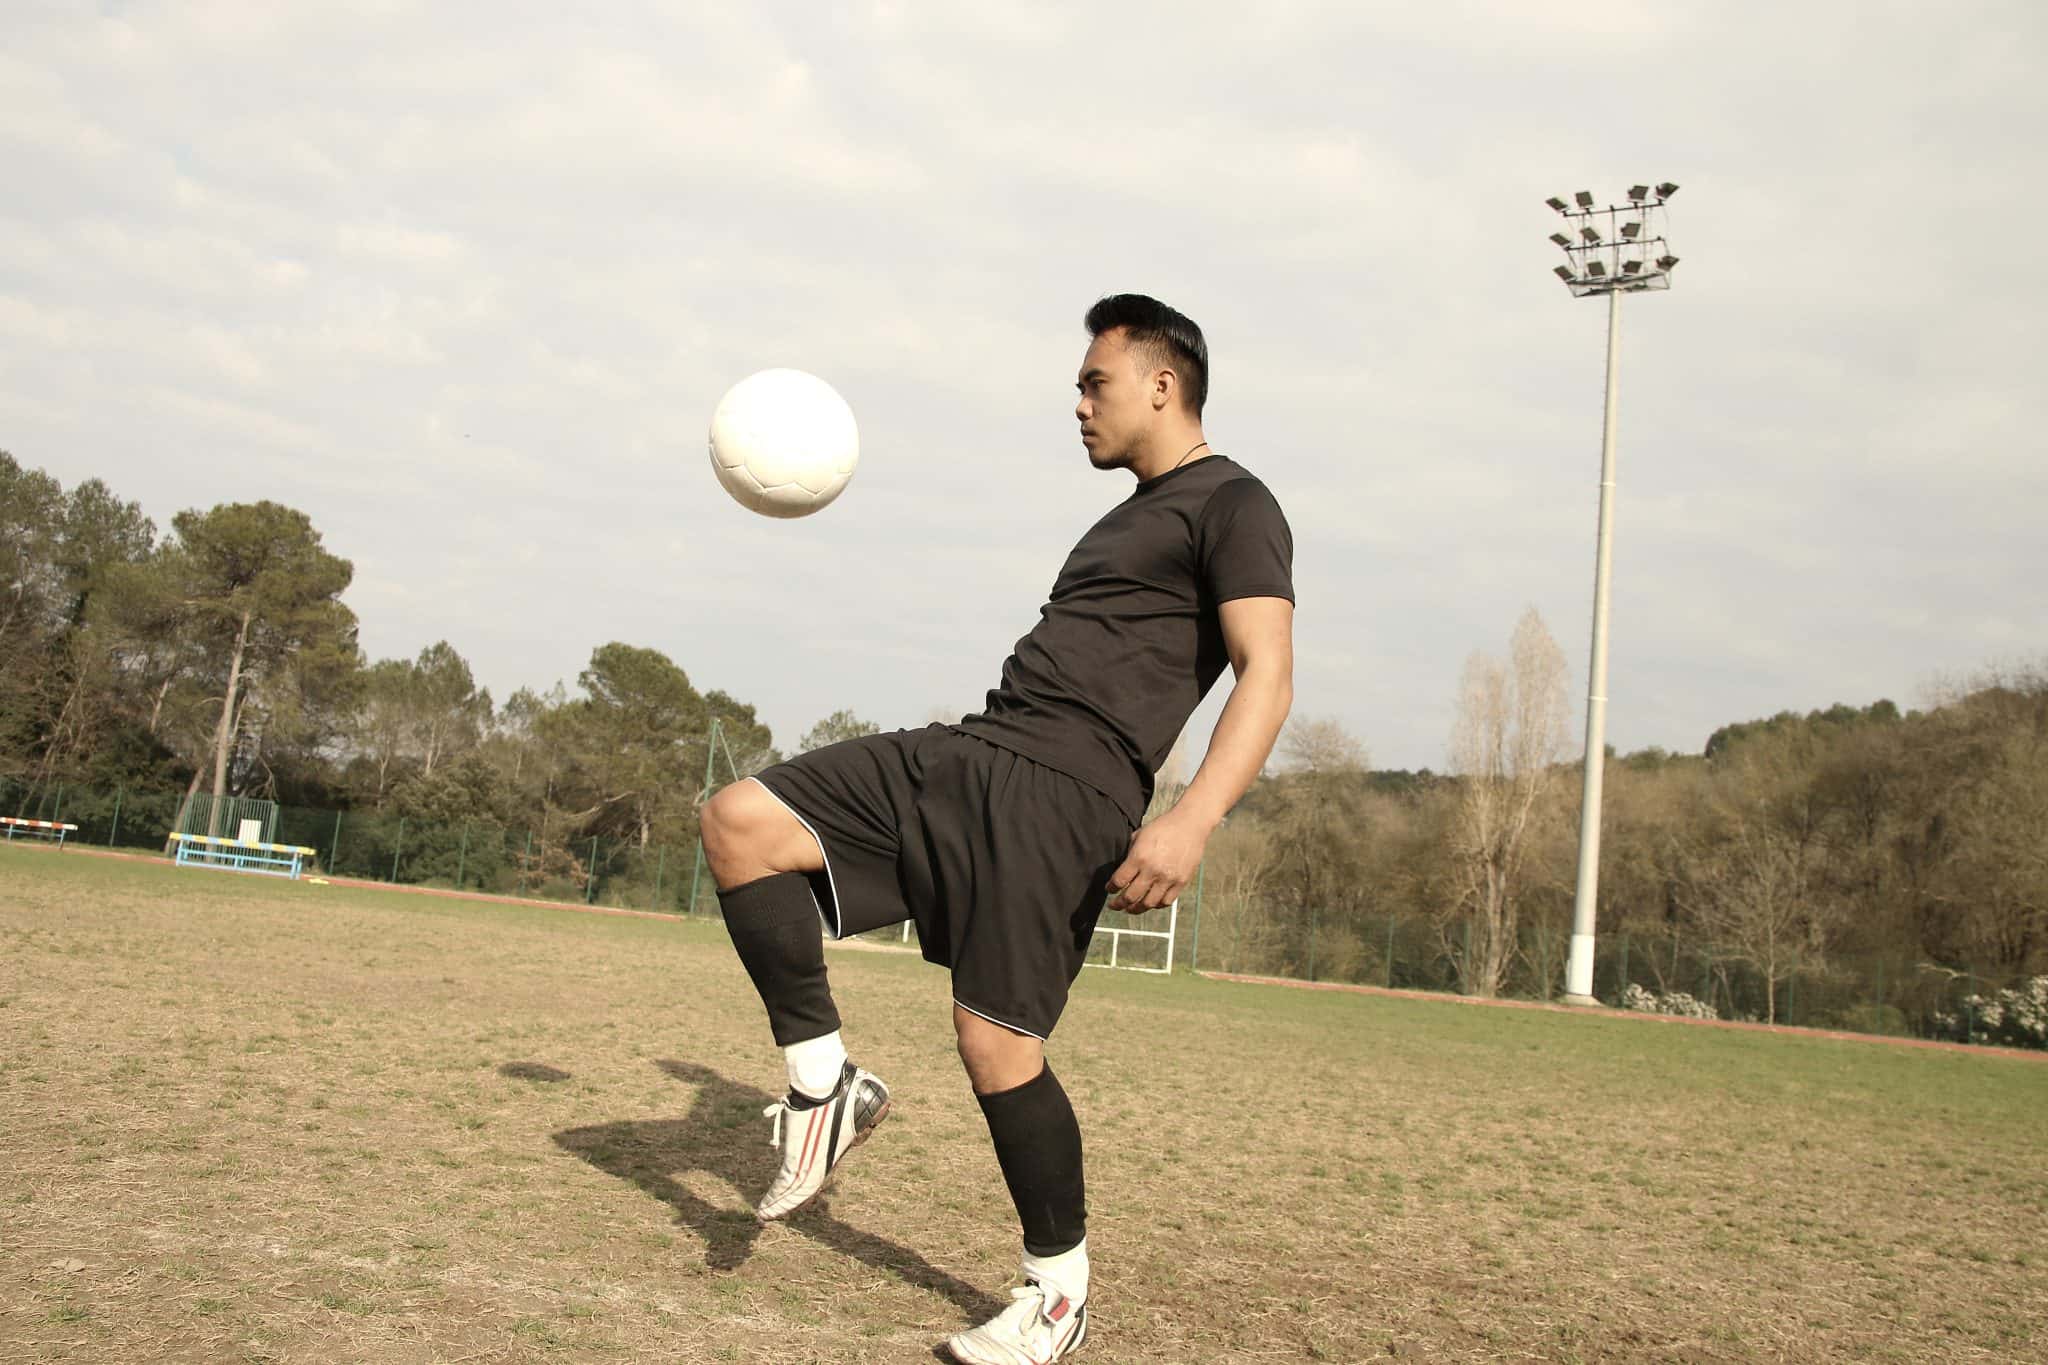 How to Juggle a Soccer Ball